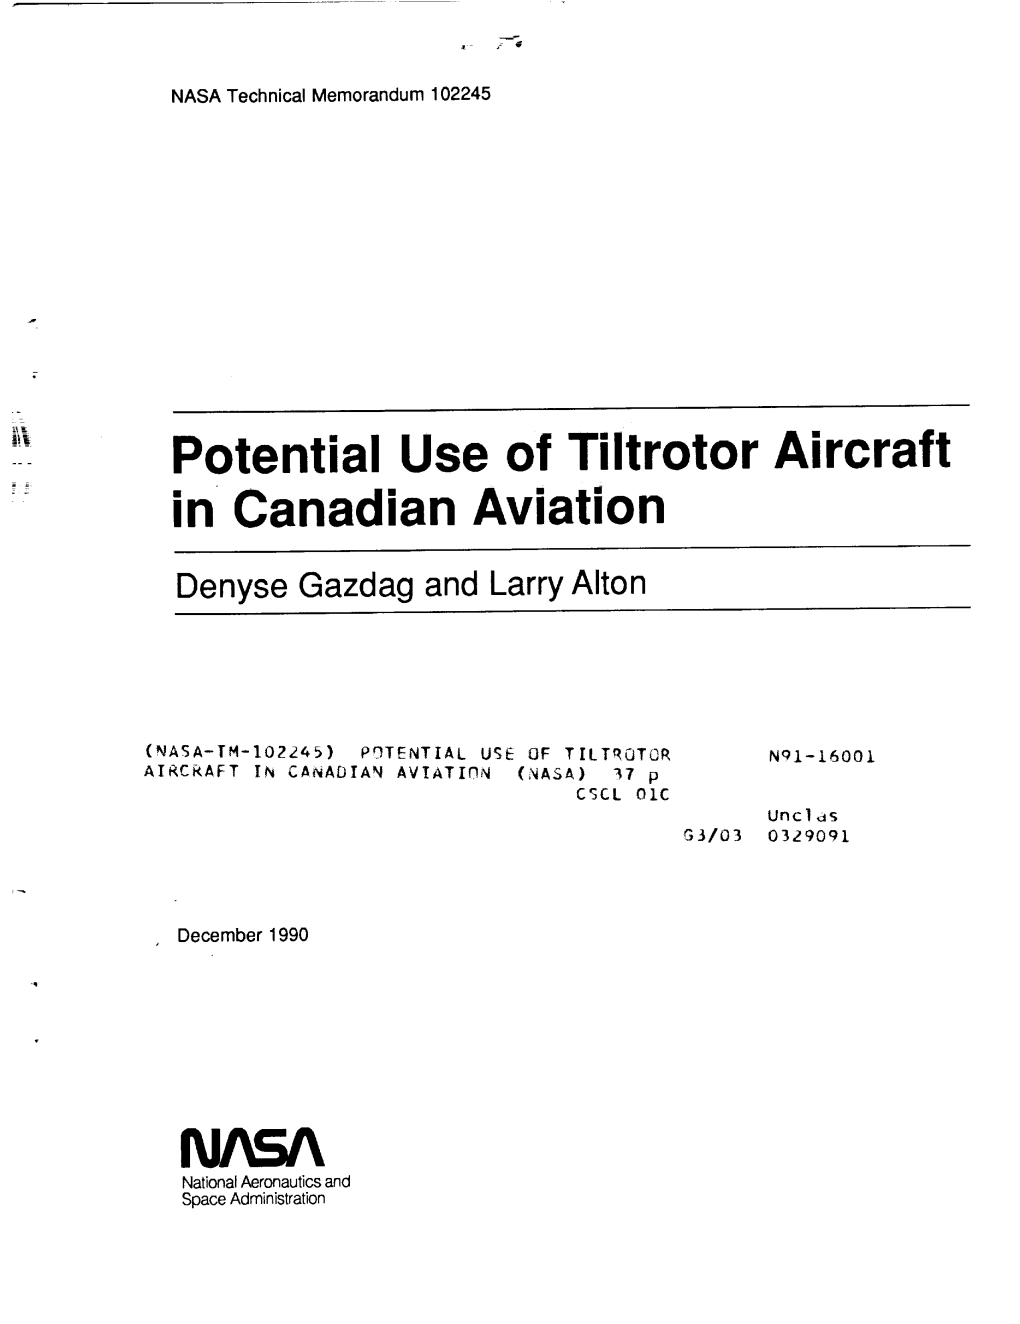 Potential Use of Tiltrotor Aircraft in Canadian Aviation